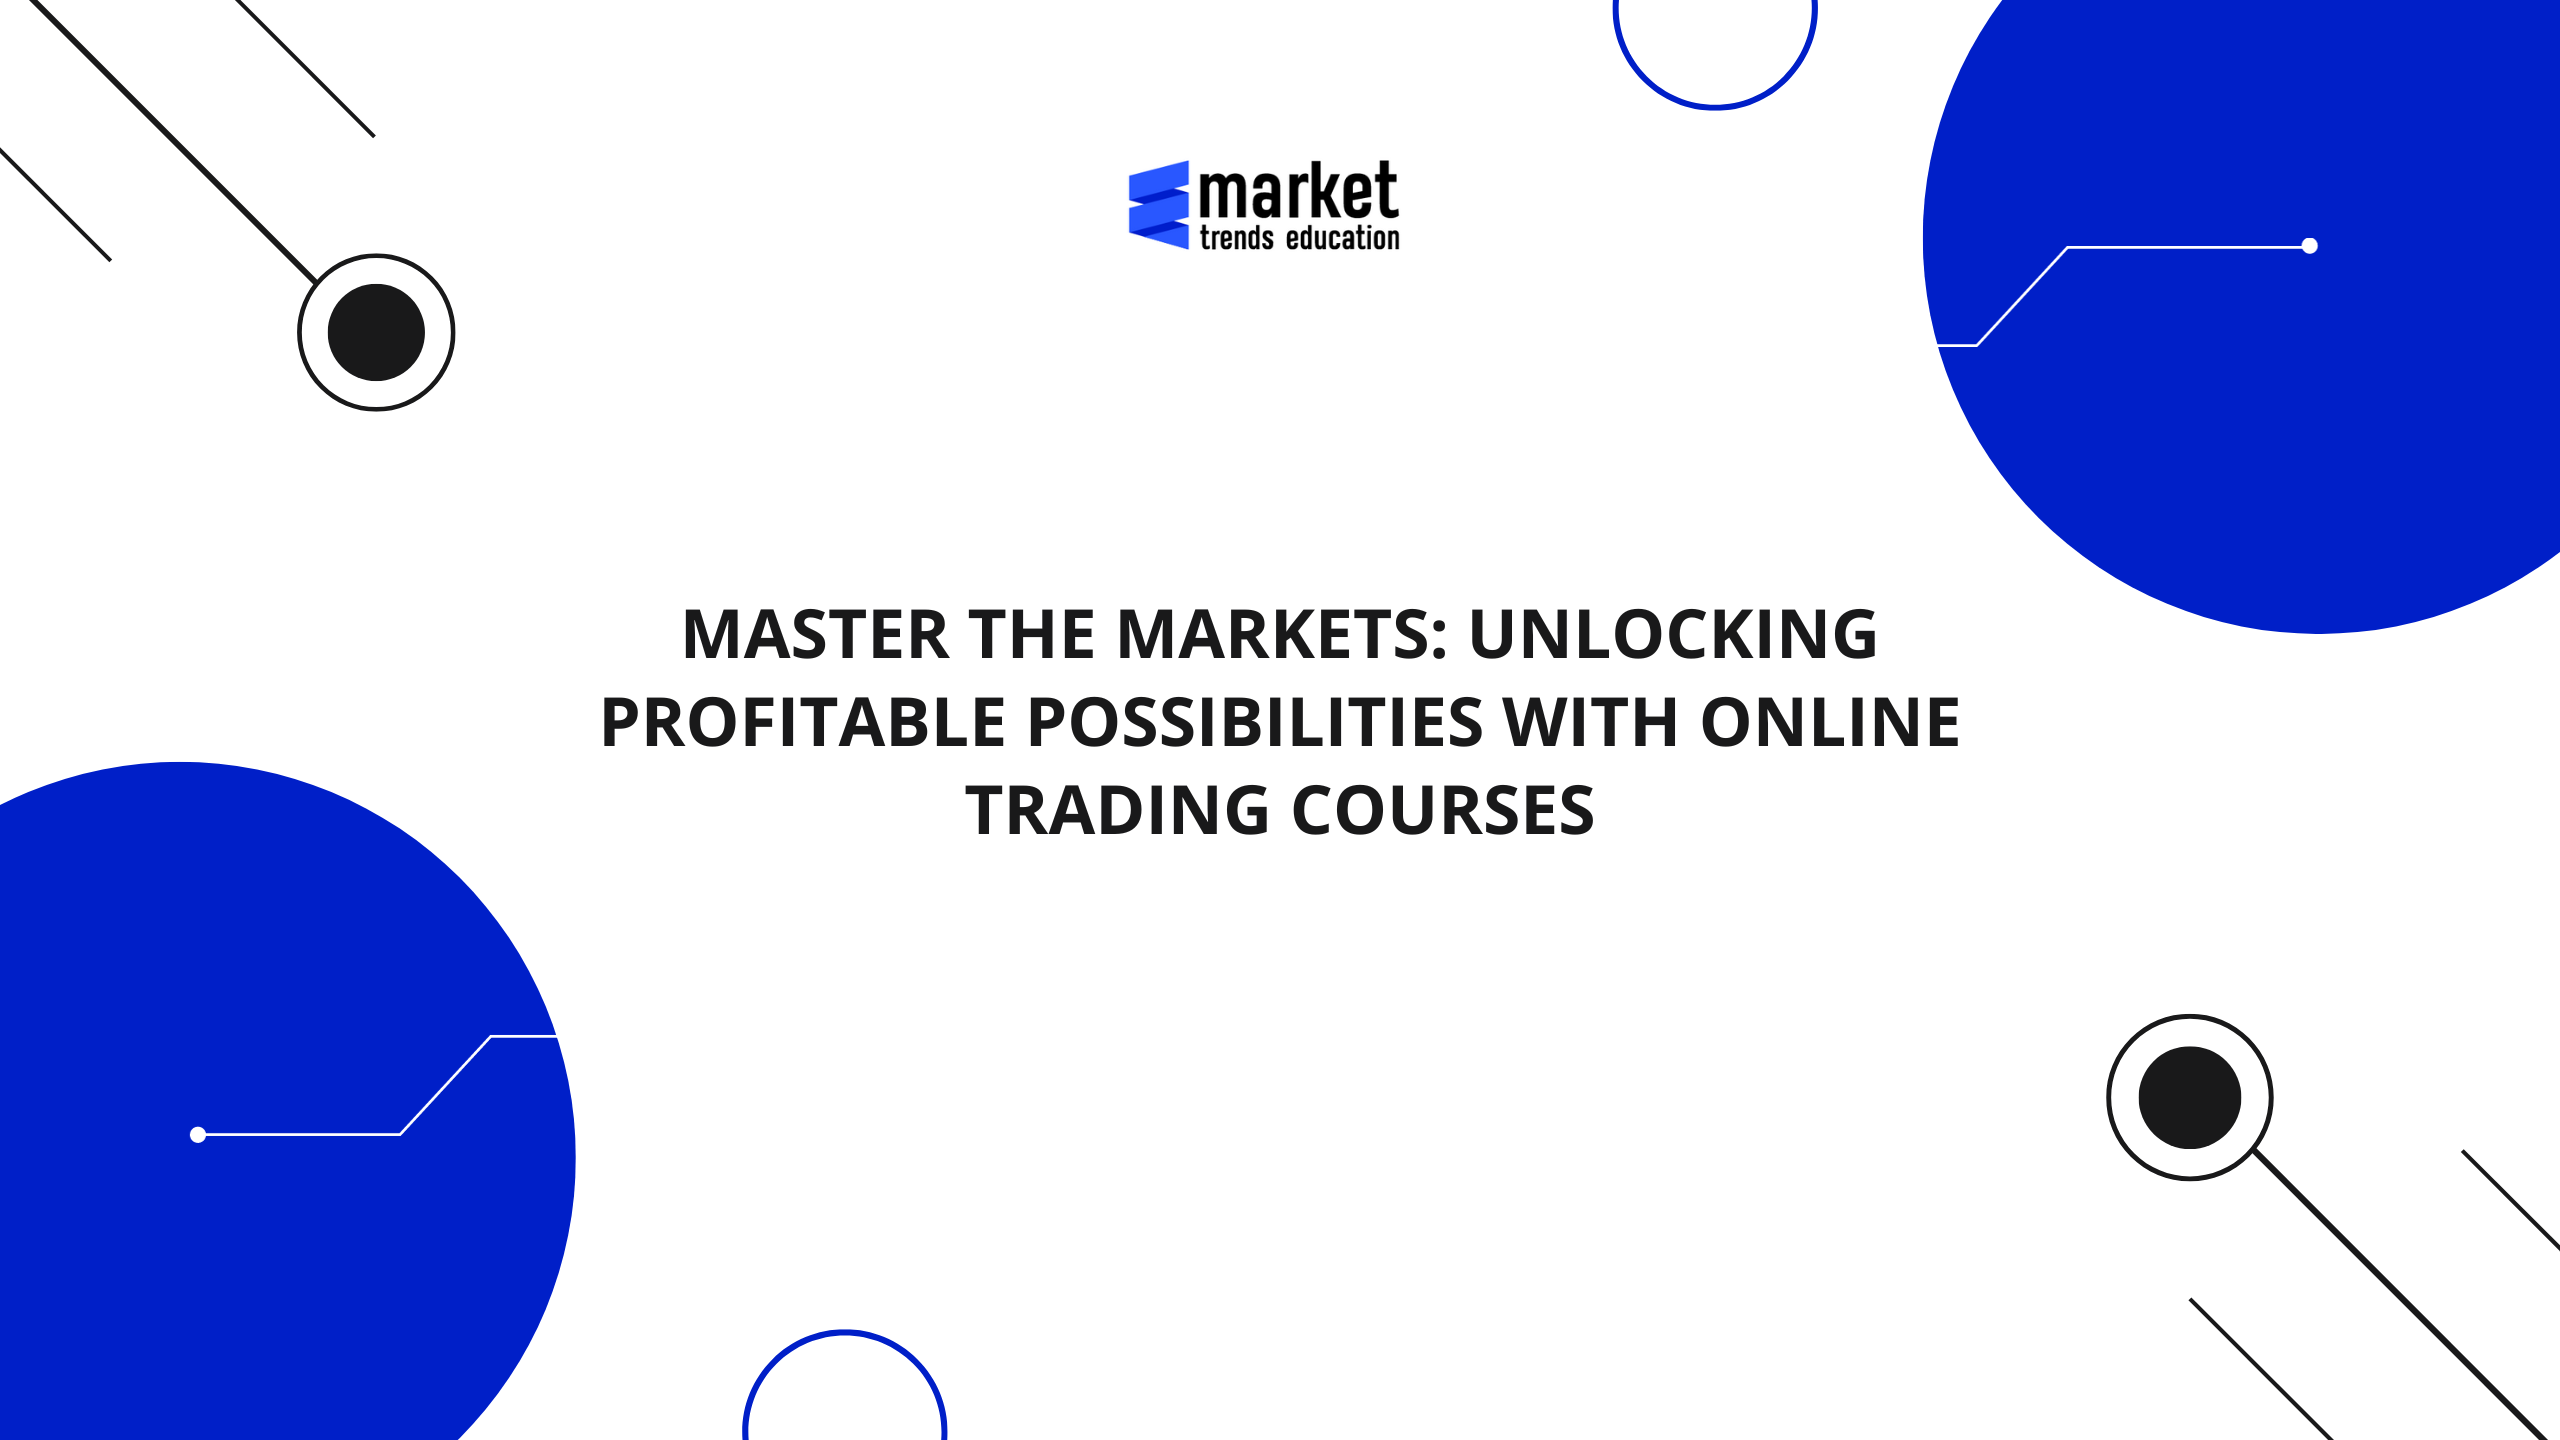 Master the Markets: Unlocking Profitable Possibilities with Online Trading Courses